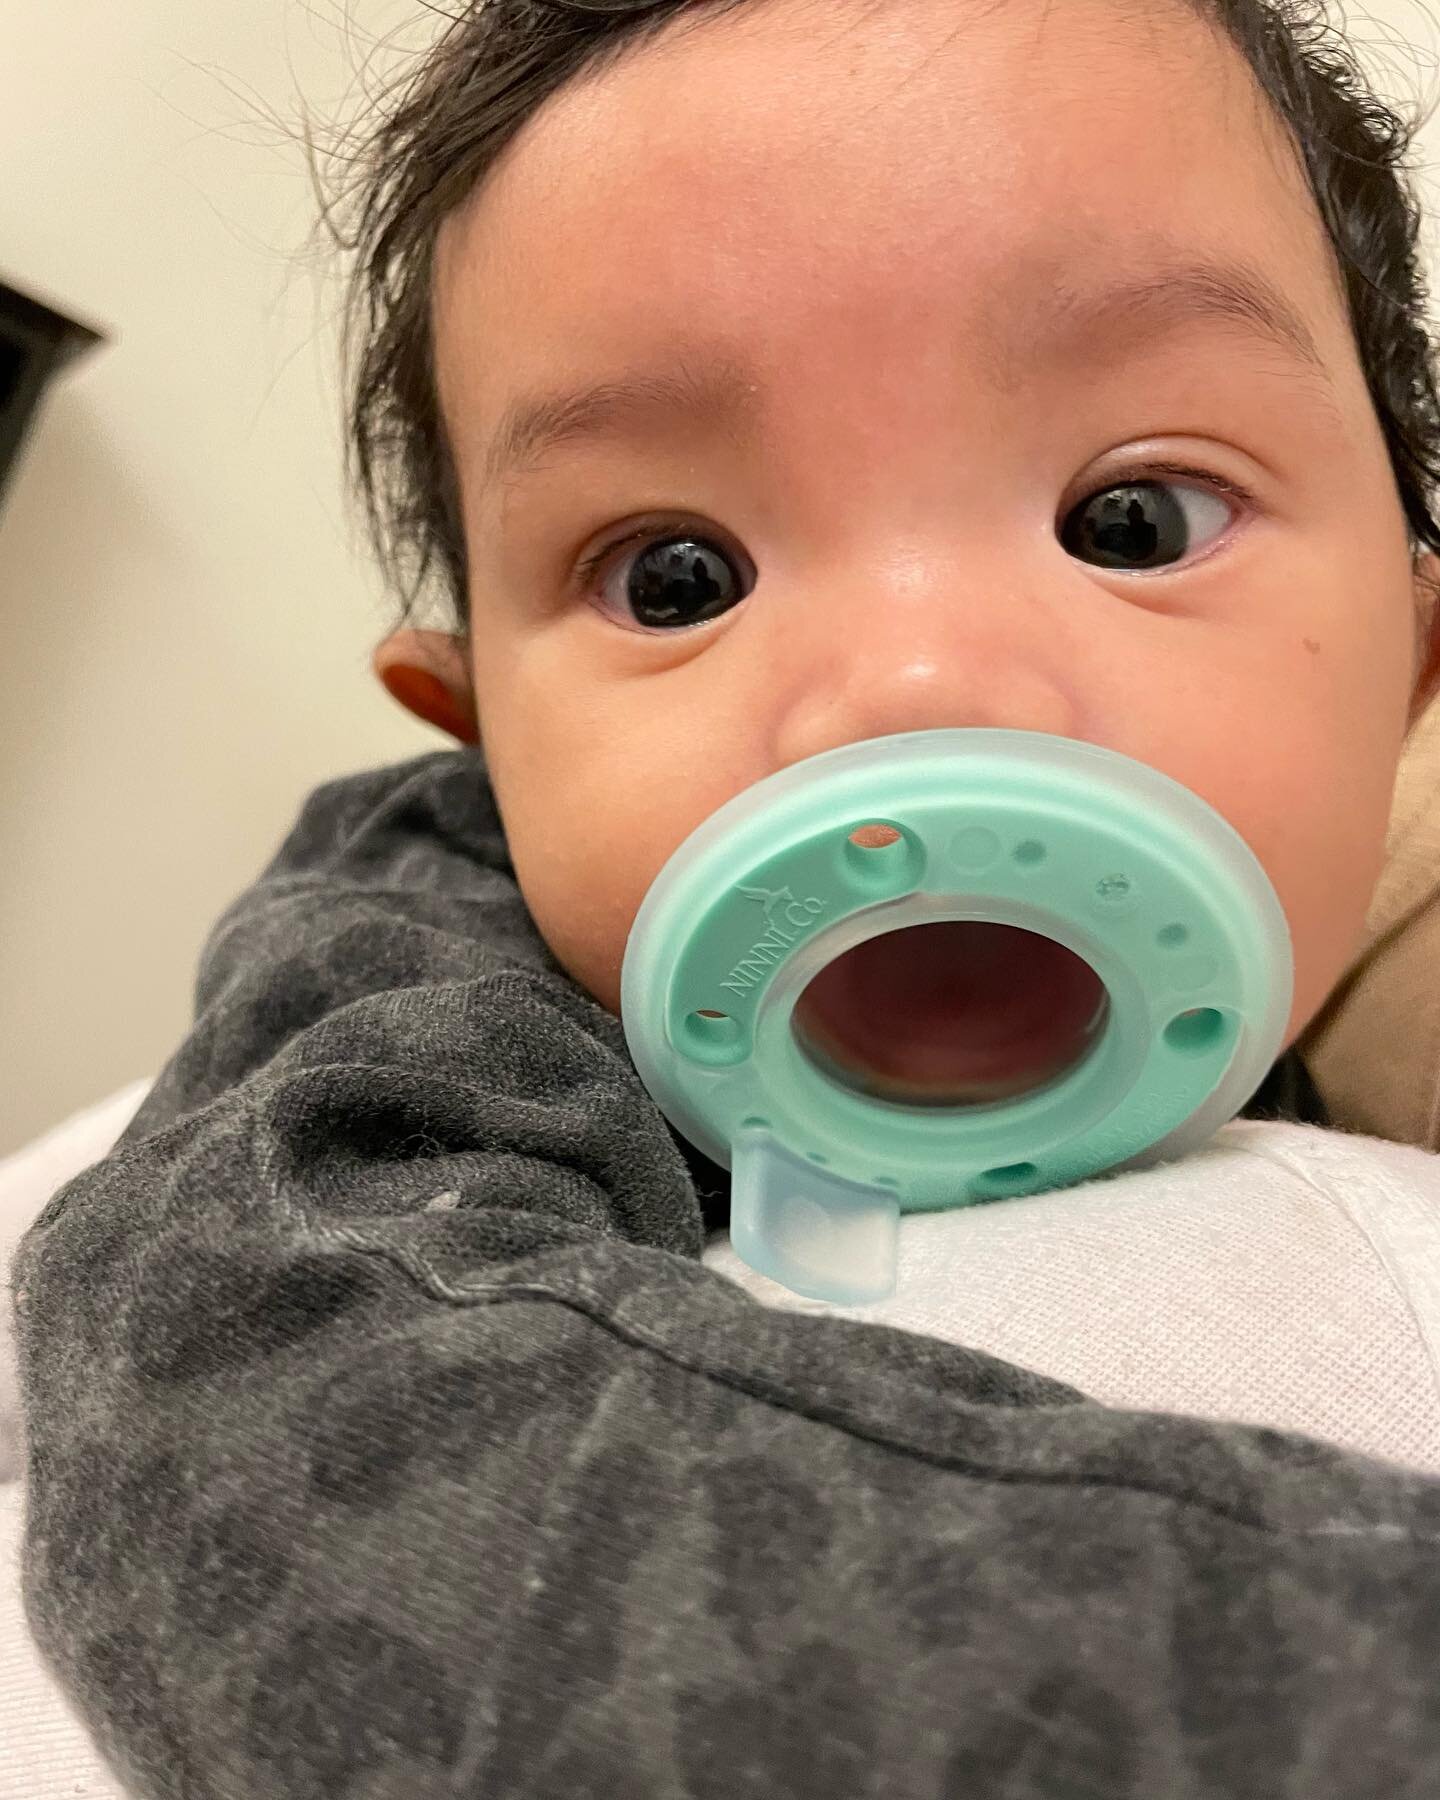 Baby is using the @ninnipacifier and loving it! it&rsquo;s a bit softer than most pacifiers and a great tool for working on oral motor/sucking skills. 

*posted with permission*

#pediatrictherapy #occupationaltherapy #breastfeeding #breastfeedingthe